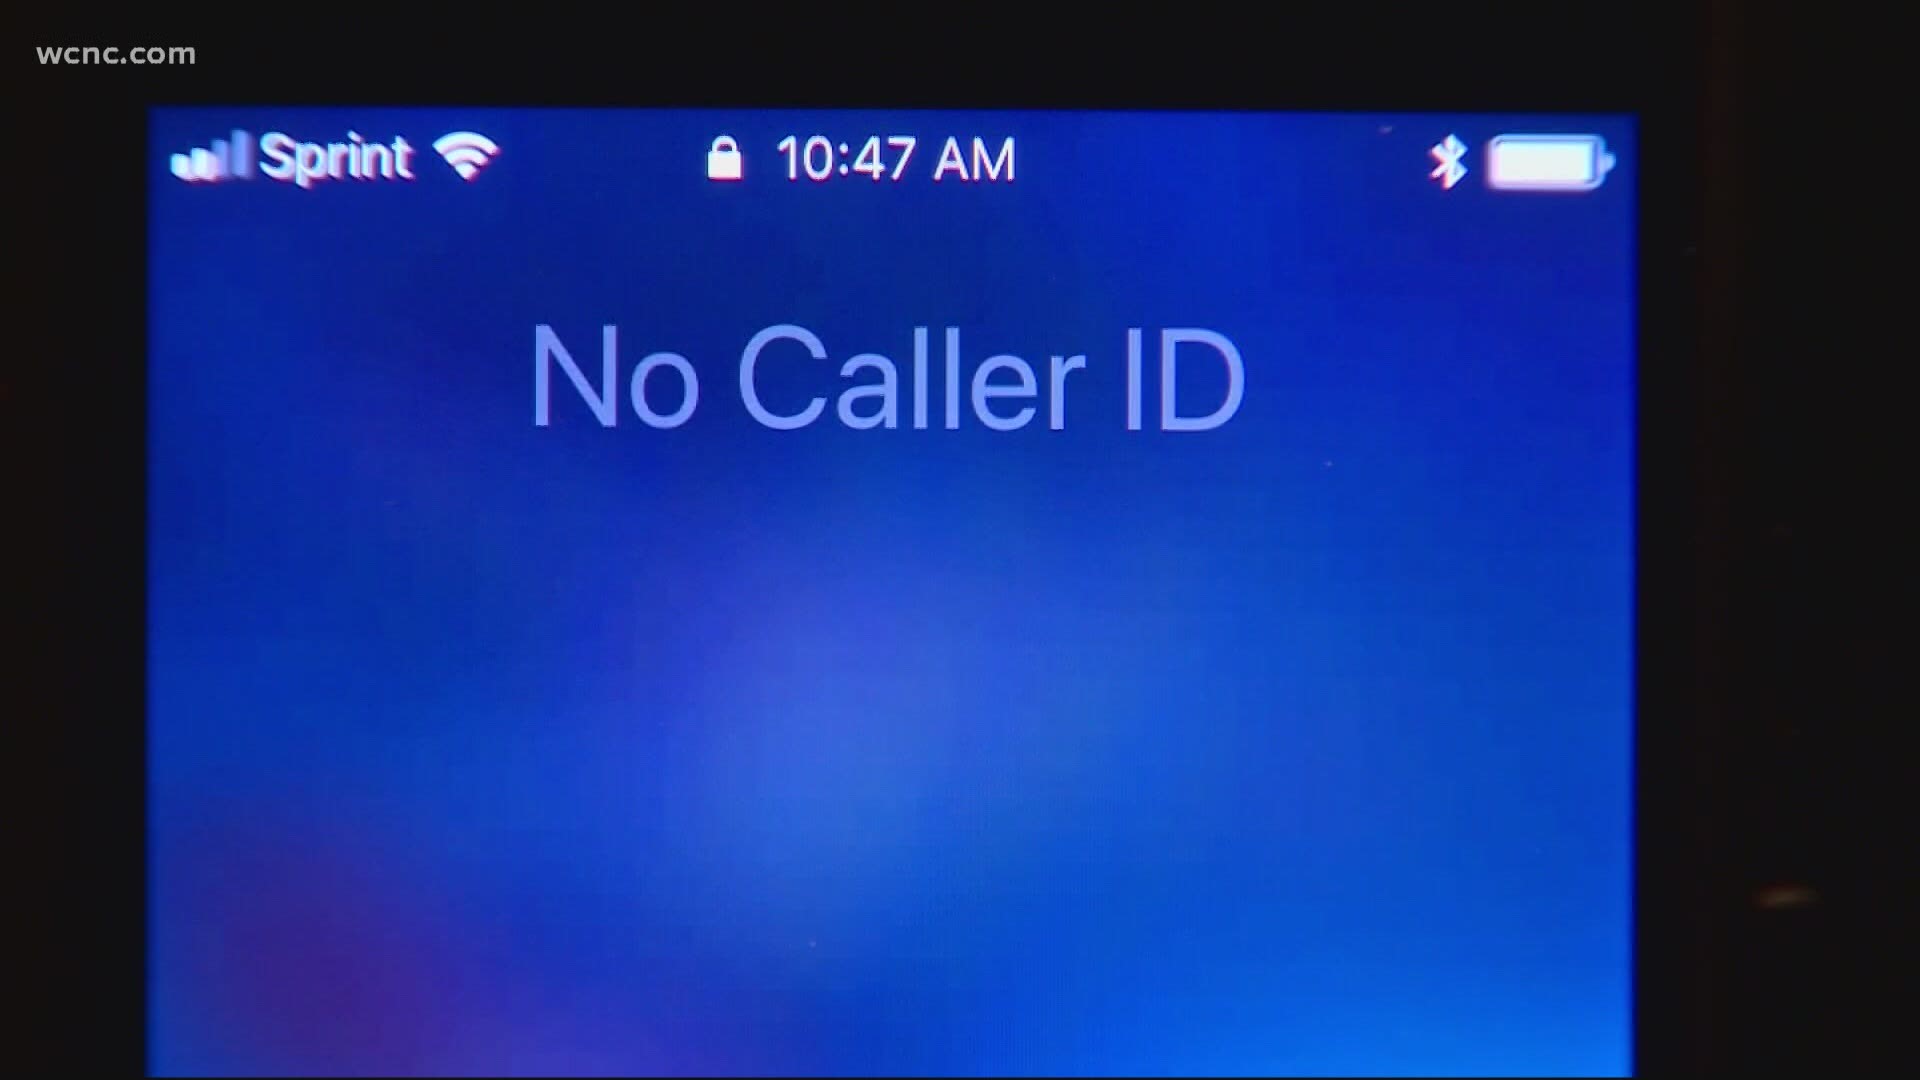 We talk with AT&T on their latest announcement to block billions of robocallers.